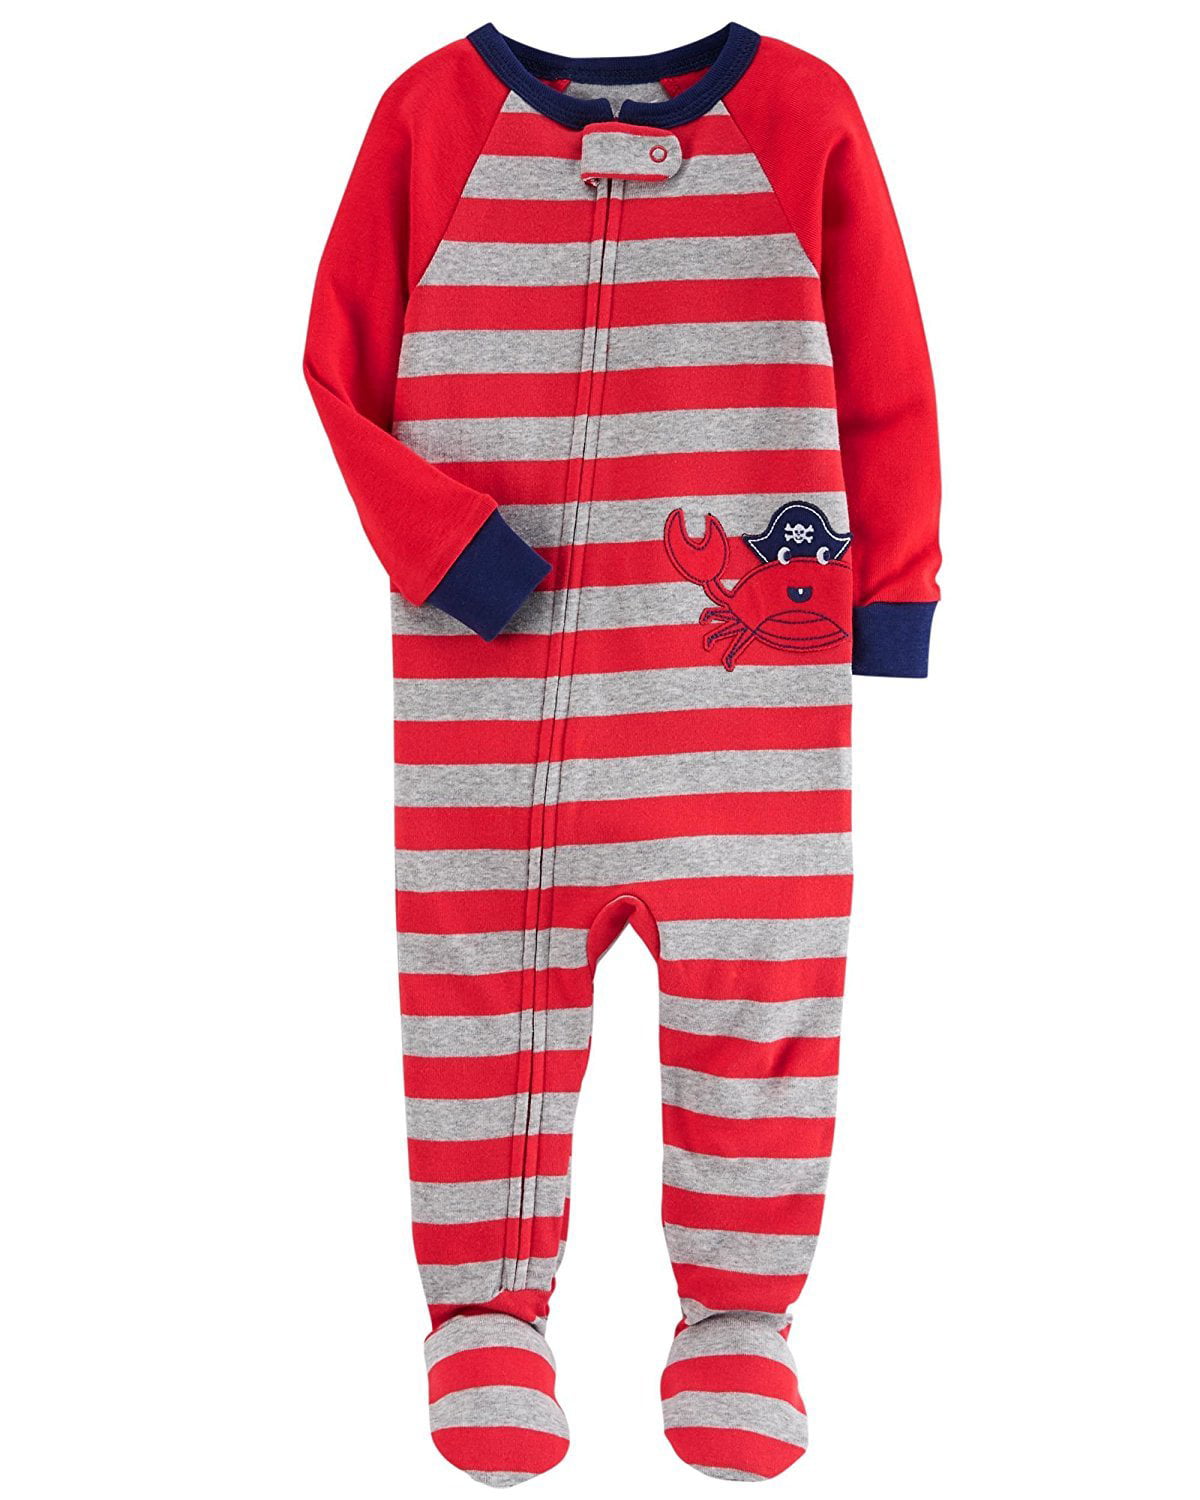 Carters Baby Boys 2t 5t One Piece Snug Fit Cotton Pajamas 4t Red